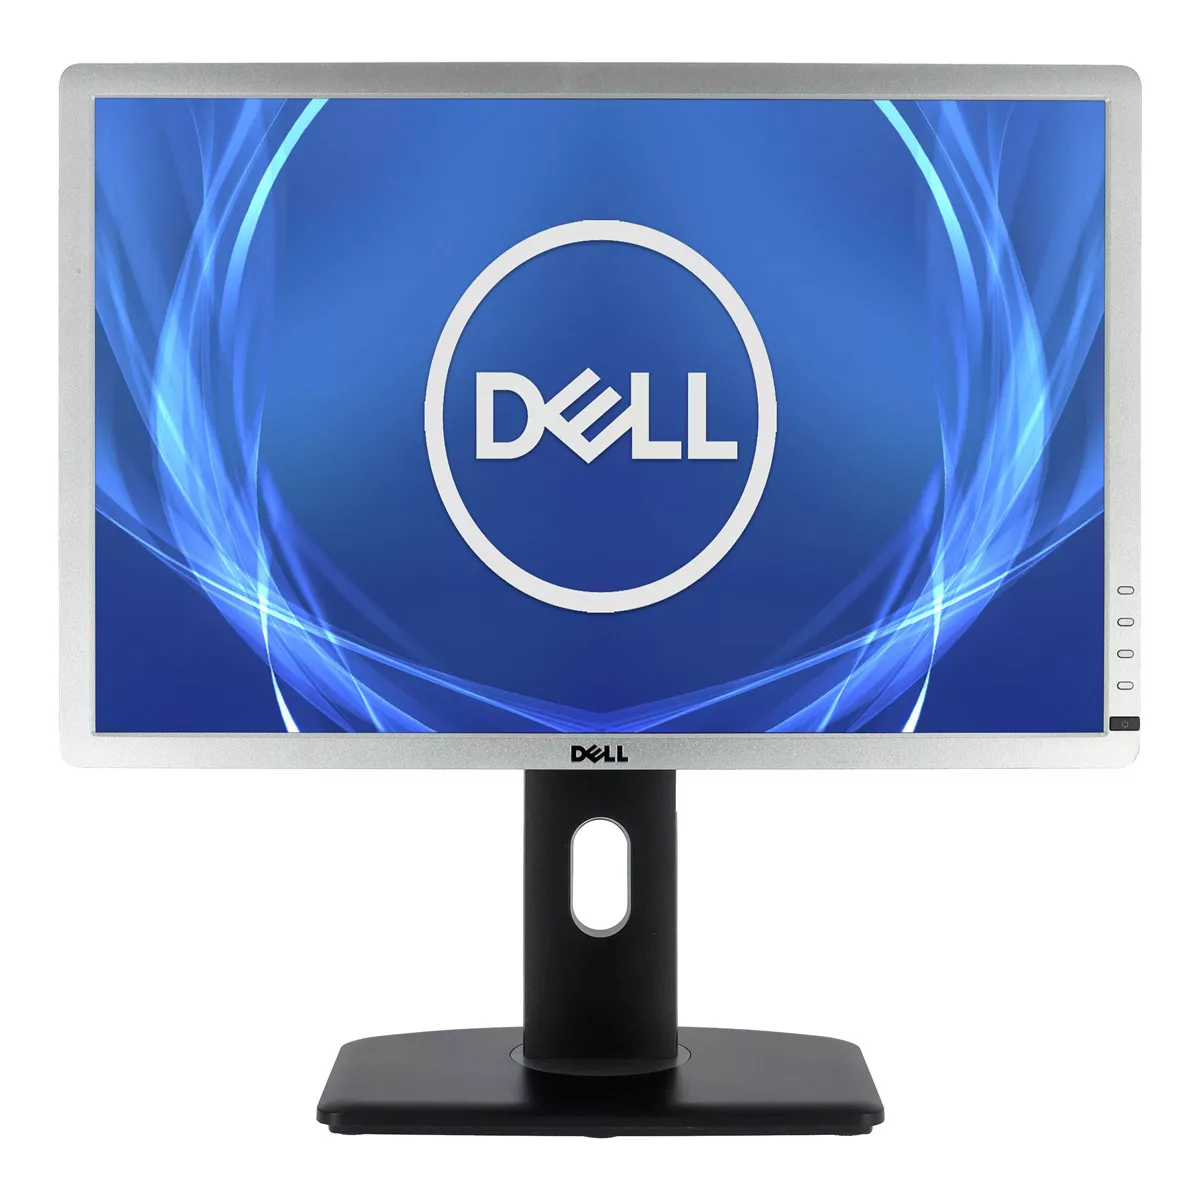 DELL P2213t LED 22 Zoll Silber B-Ware